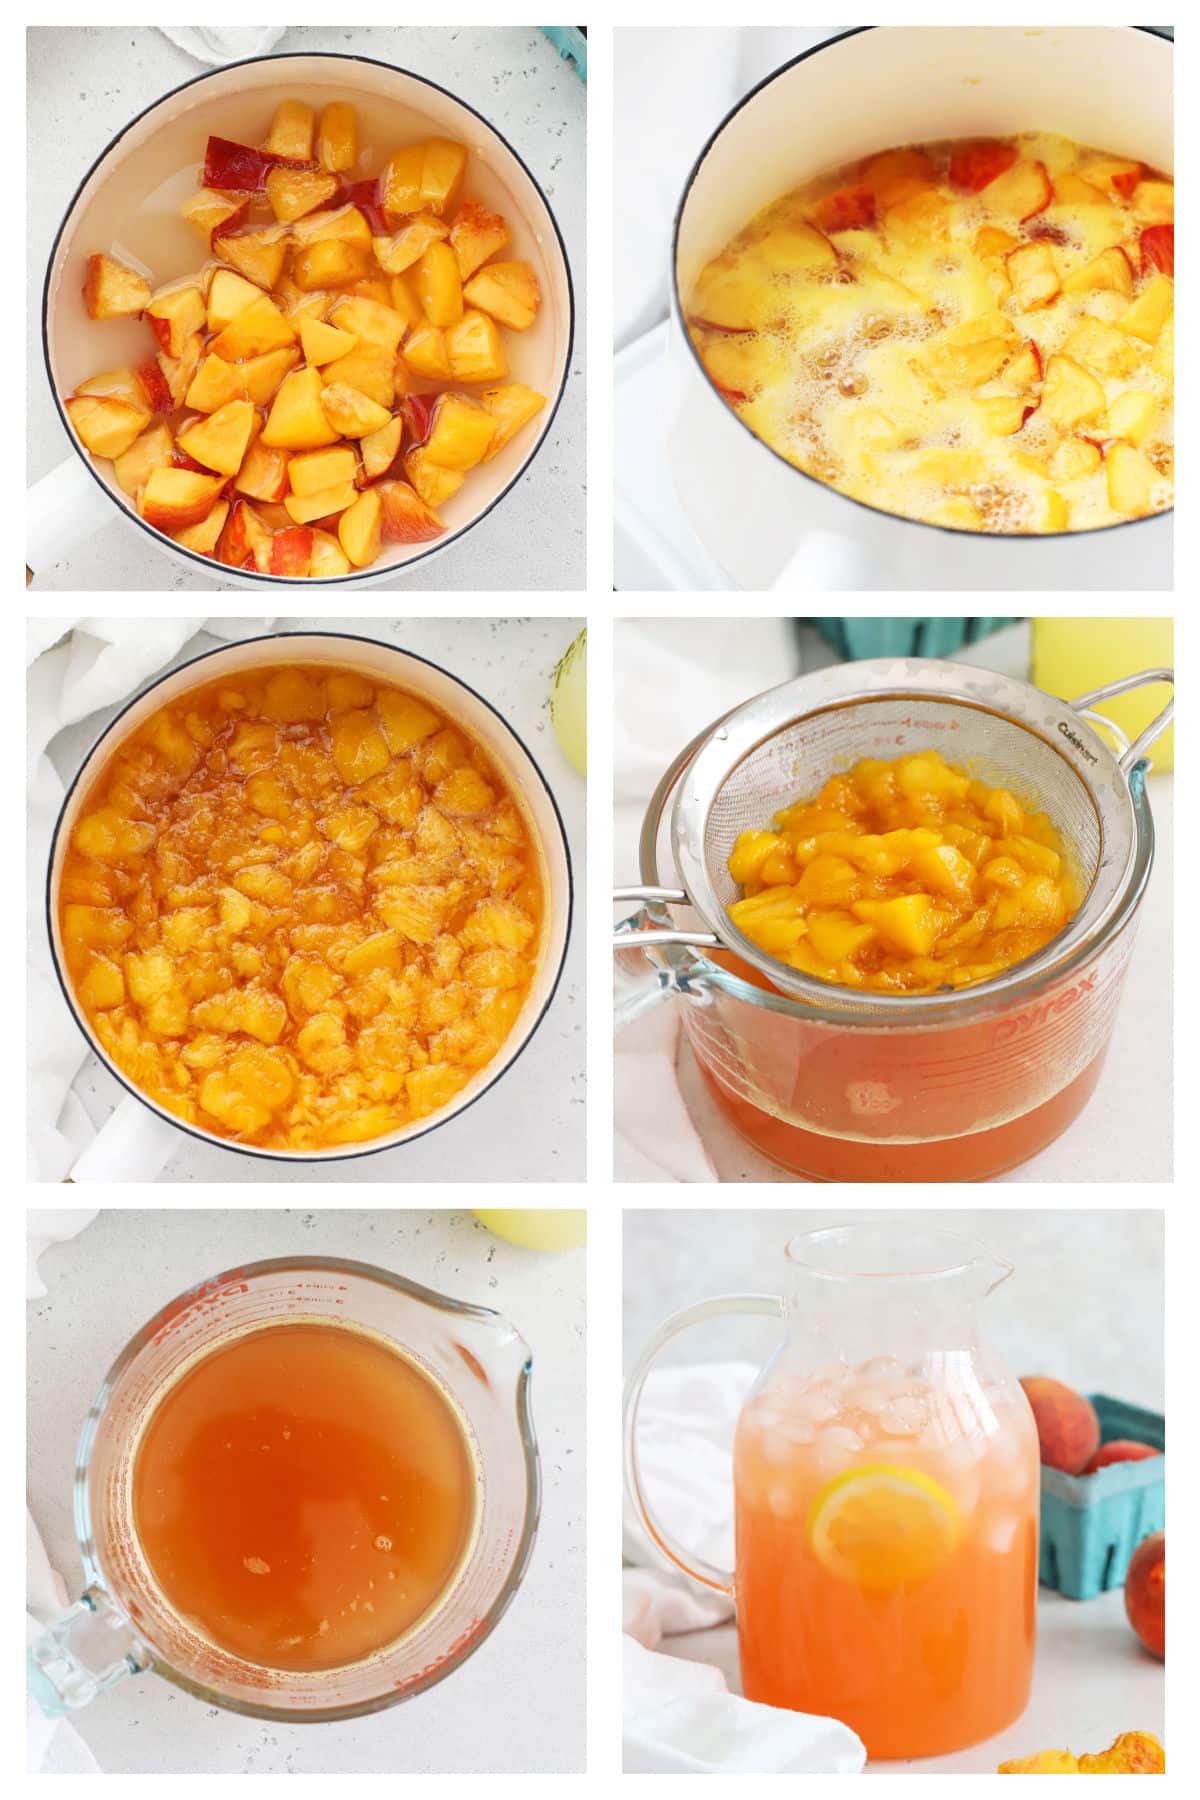 making homemade peach lemonade from scratch, step by step